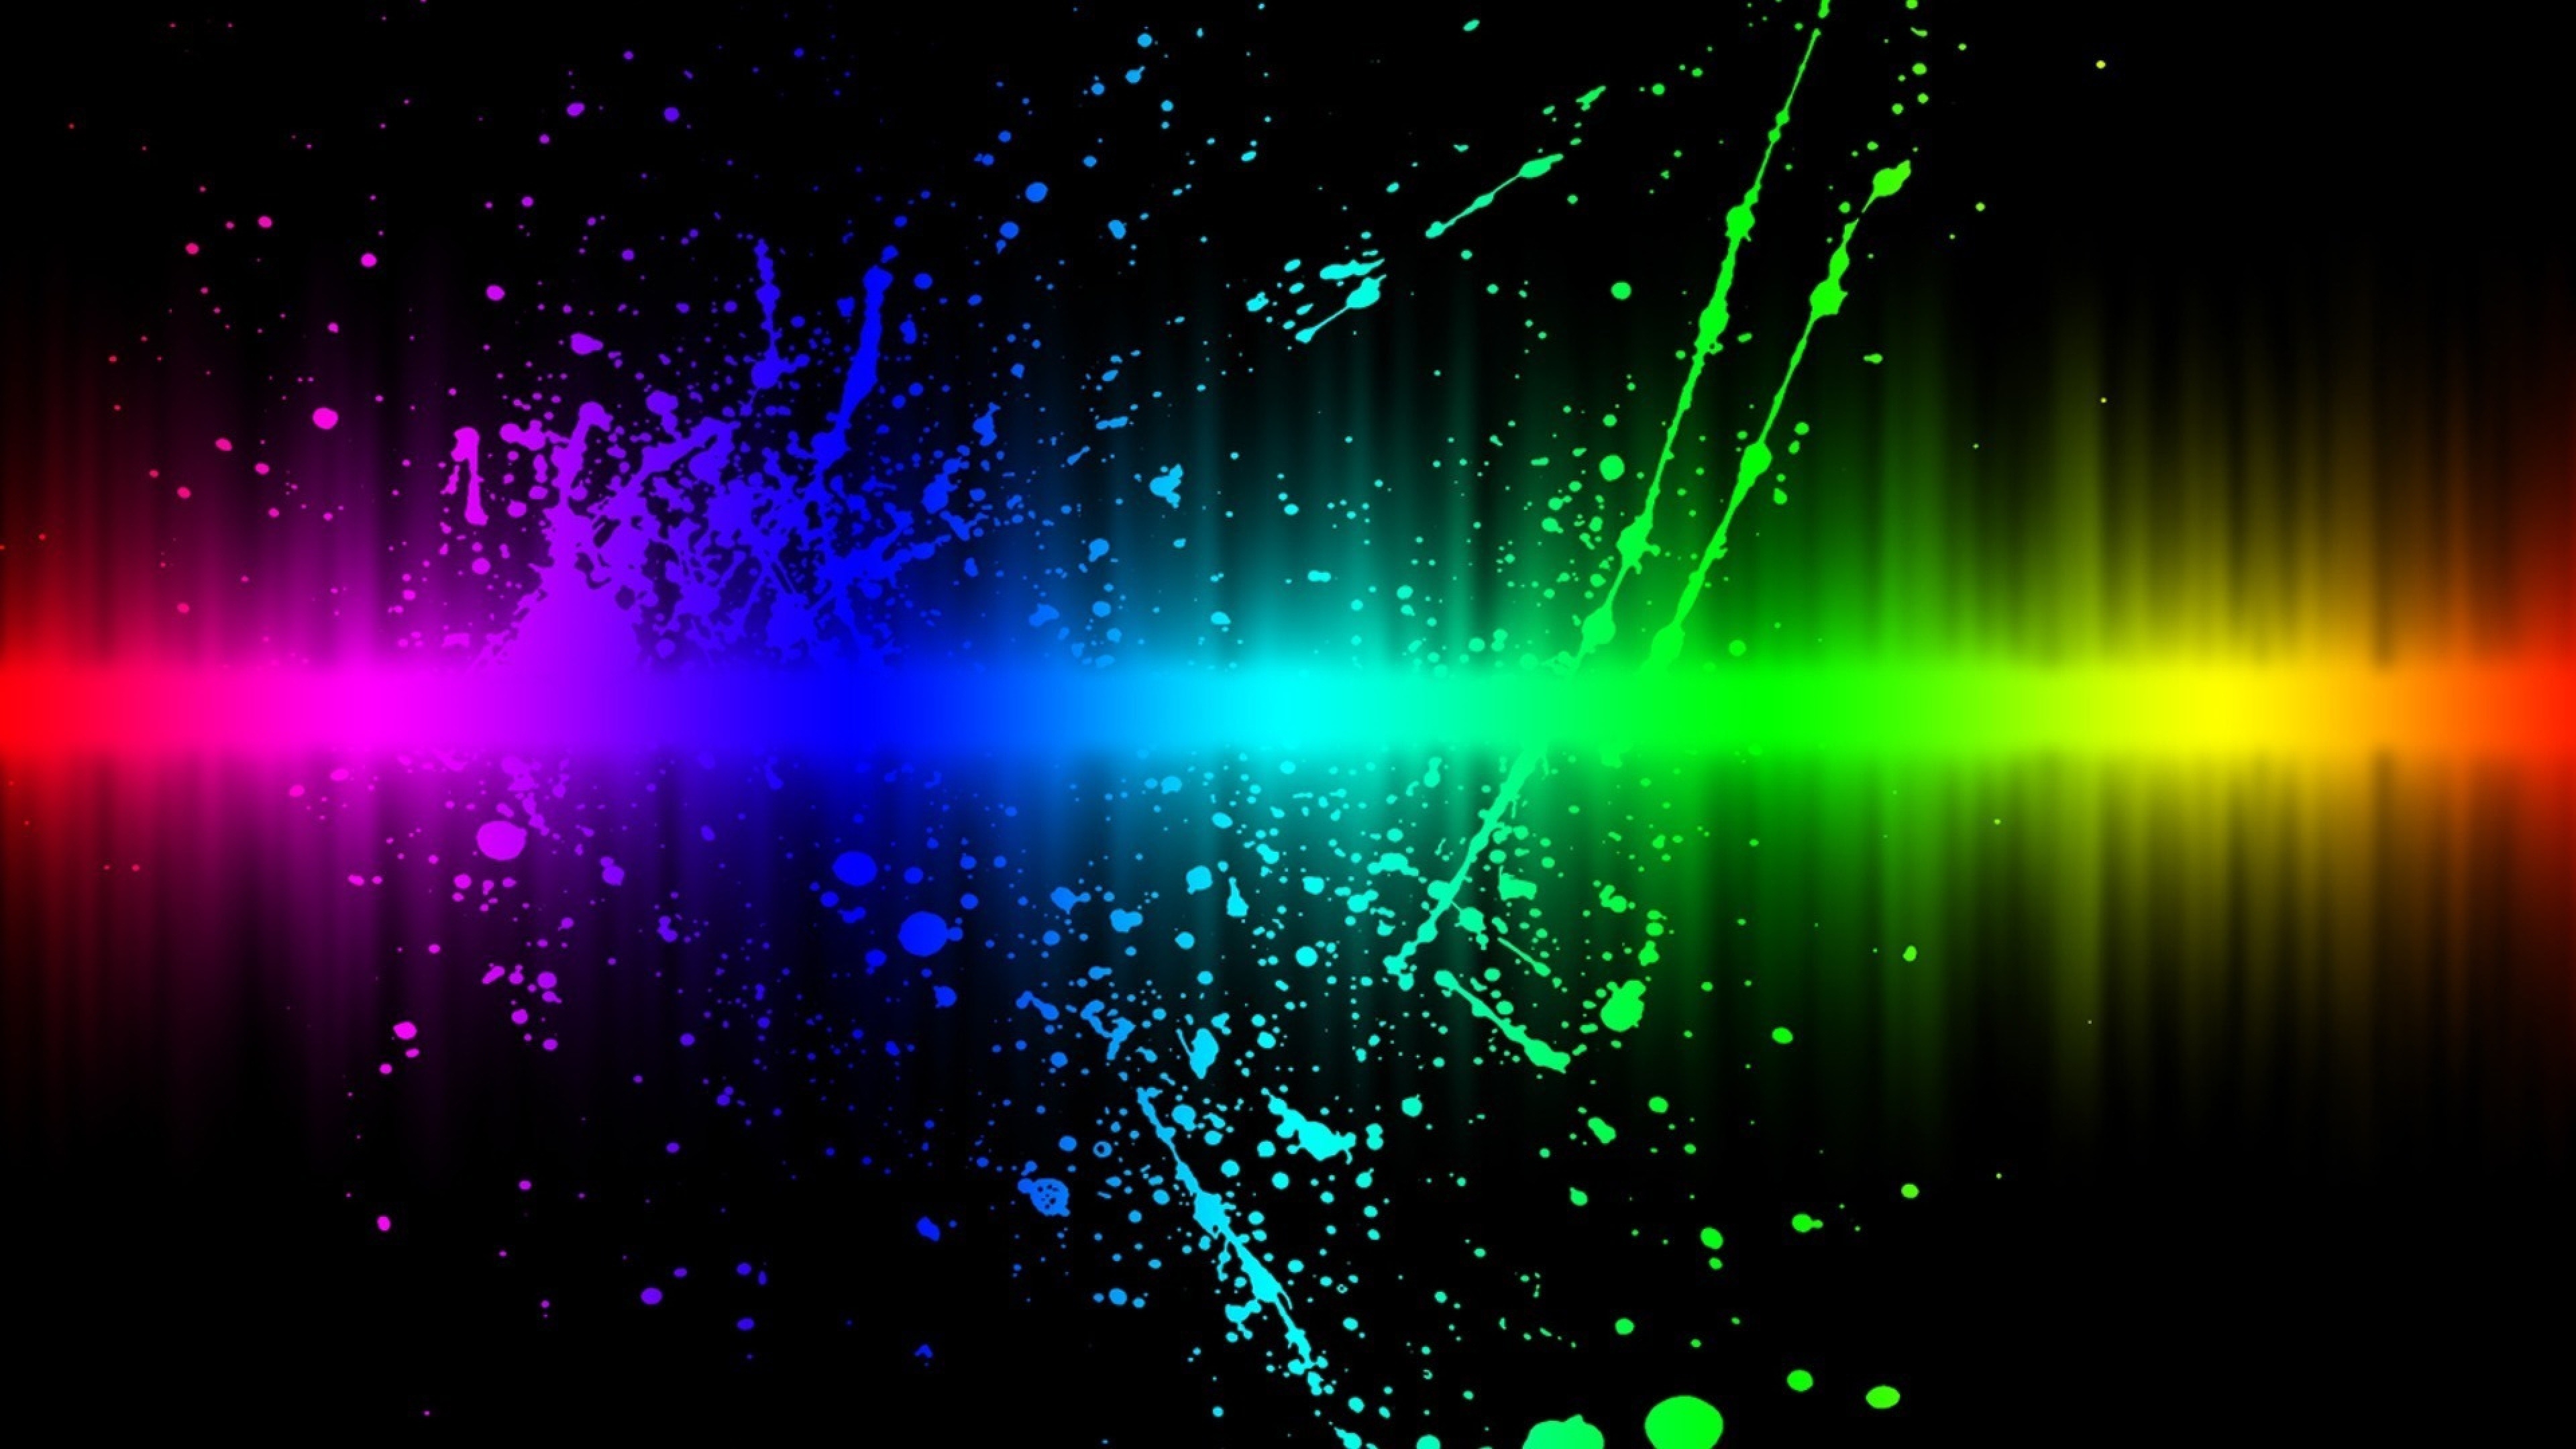 Cool rainbow wallpaper, Trendy and stylish, Colorful and eye-catching, Desktop and mobile customization, 3840x2160 4K Desktop